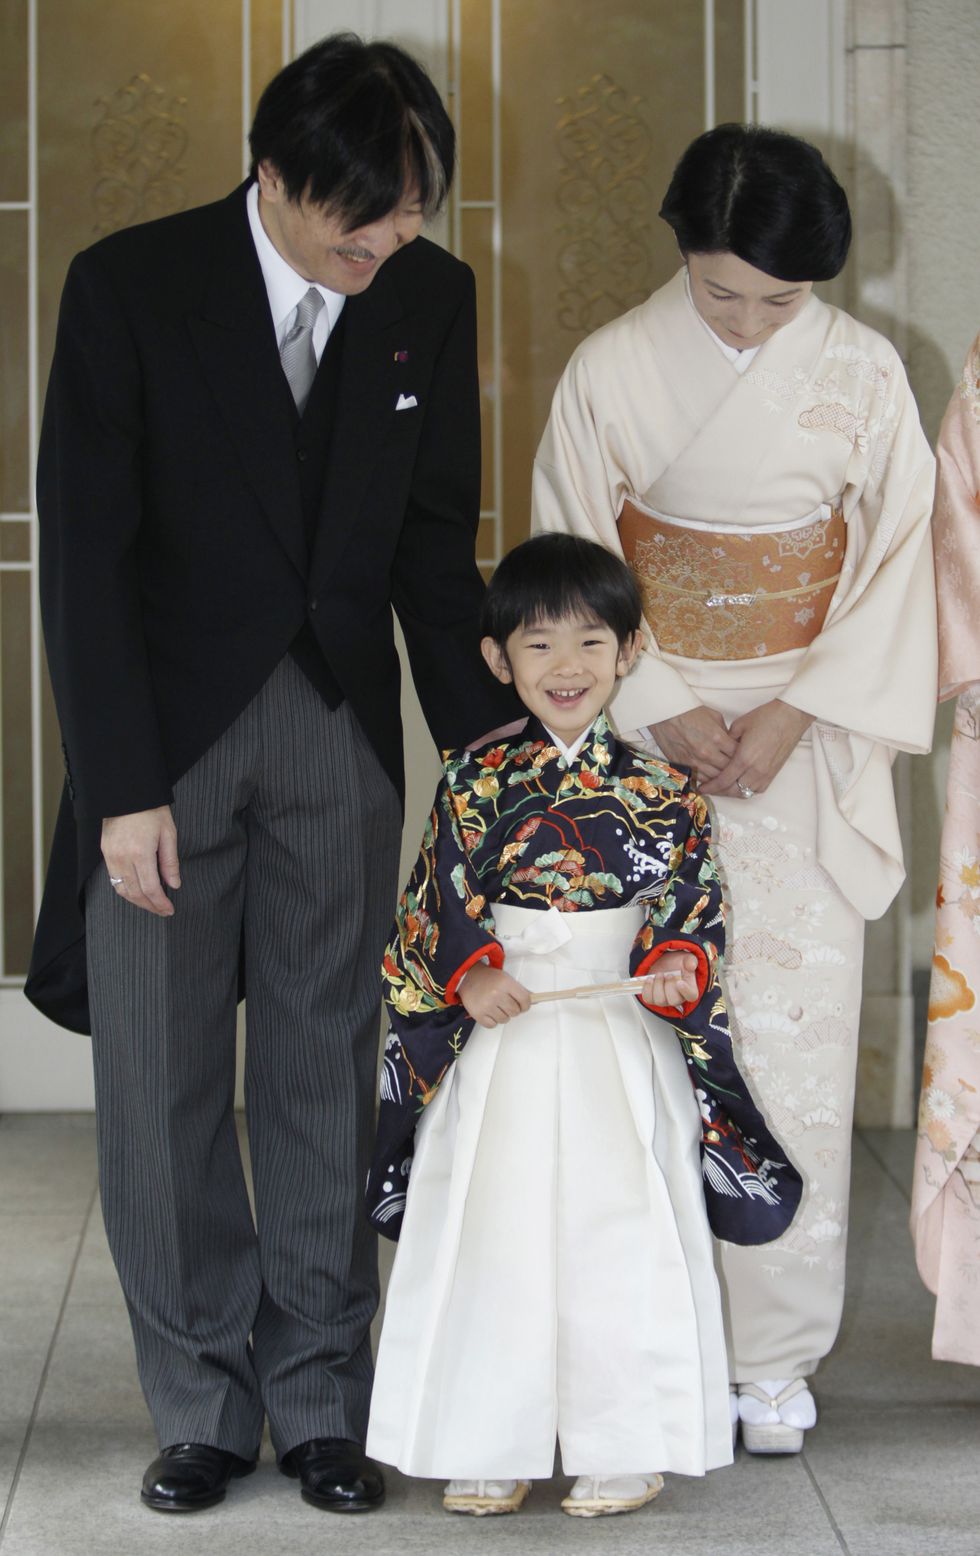 japan's prince hisahito, wearing a traditional ceremonial attire, smiles with his parents prince akishino and princess kiko after attending chakko no gi ceremony to celebrate his growth and the passage from infancy to childhood at the akasaka imperial estate in tokyo thursday, nov 3, 2011 prince hisahito, who turned 5 year old in last september, had his rite of passage as a member of the japanese royal family ap photoissei kato, pool